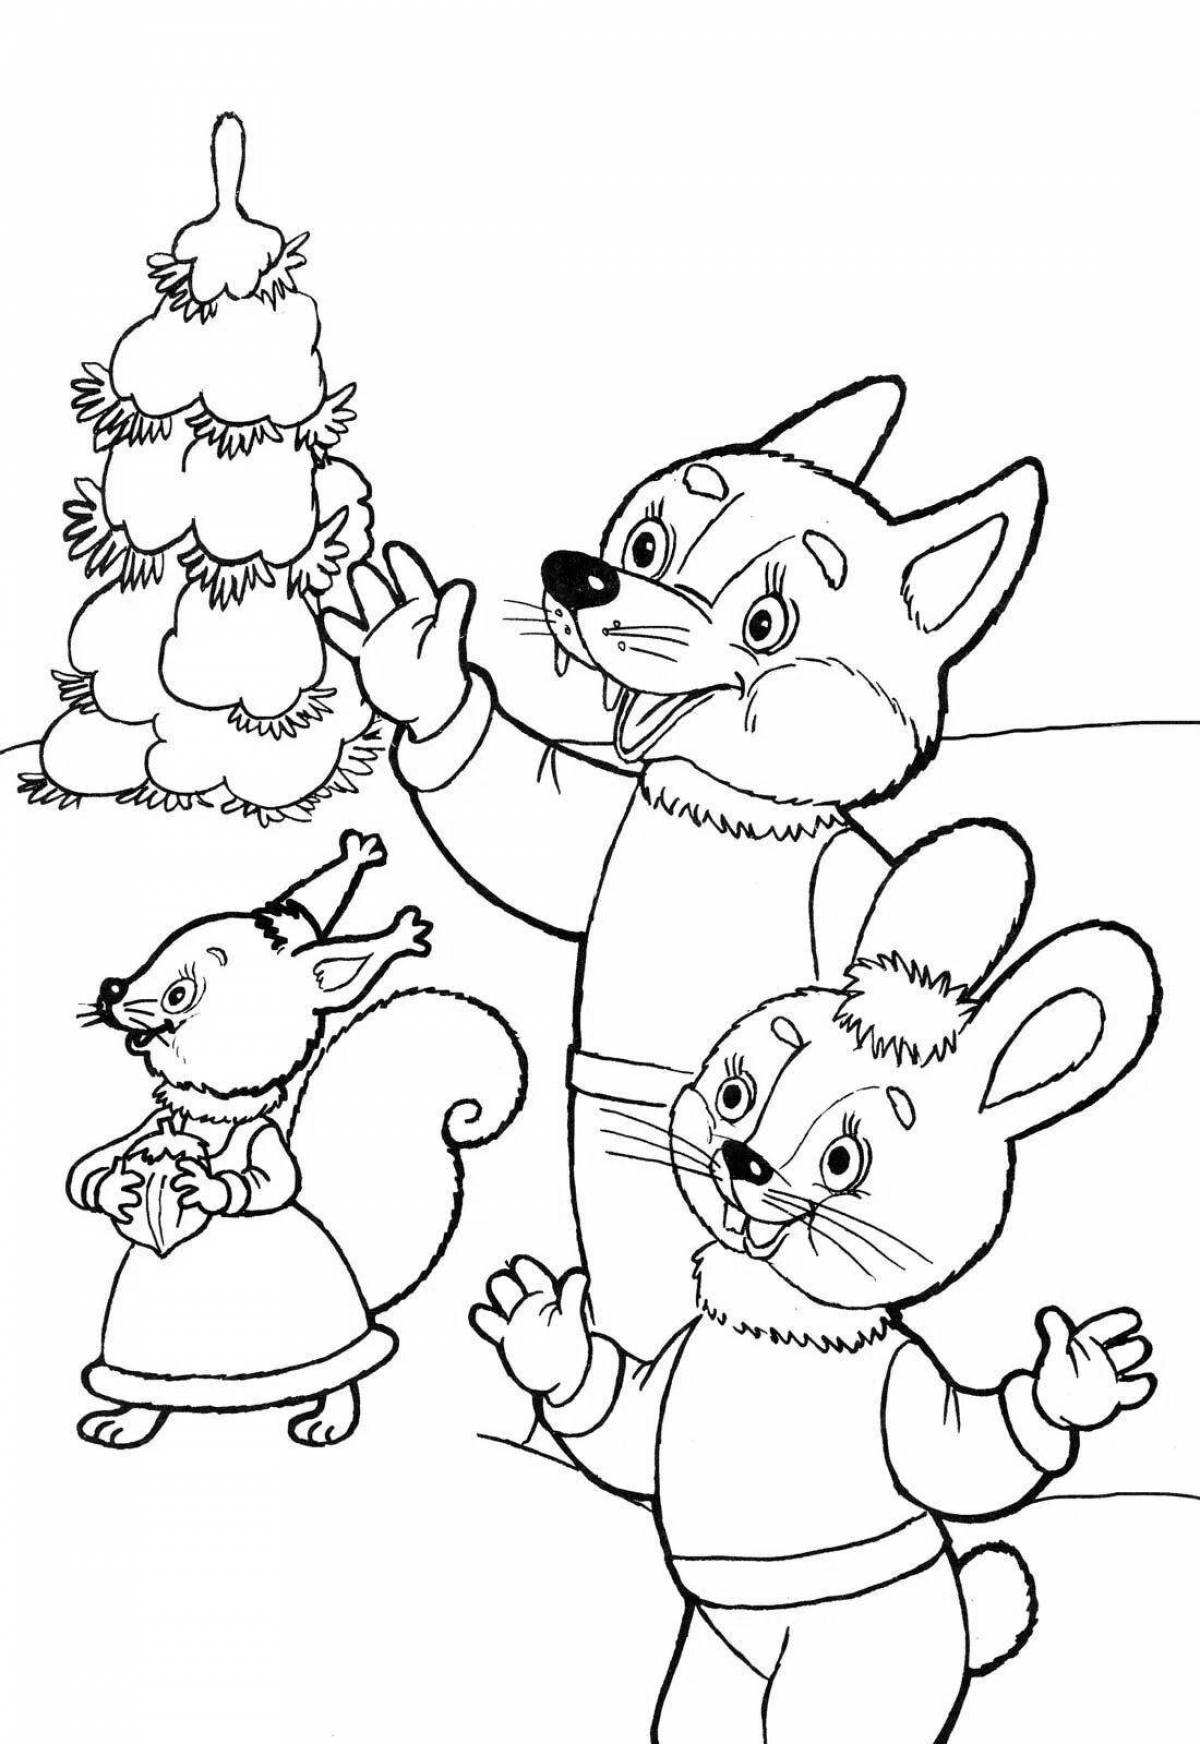 Elegant animal coloring pages in winter